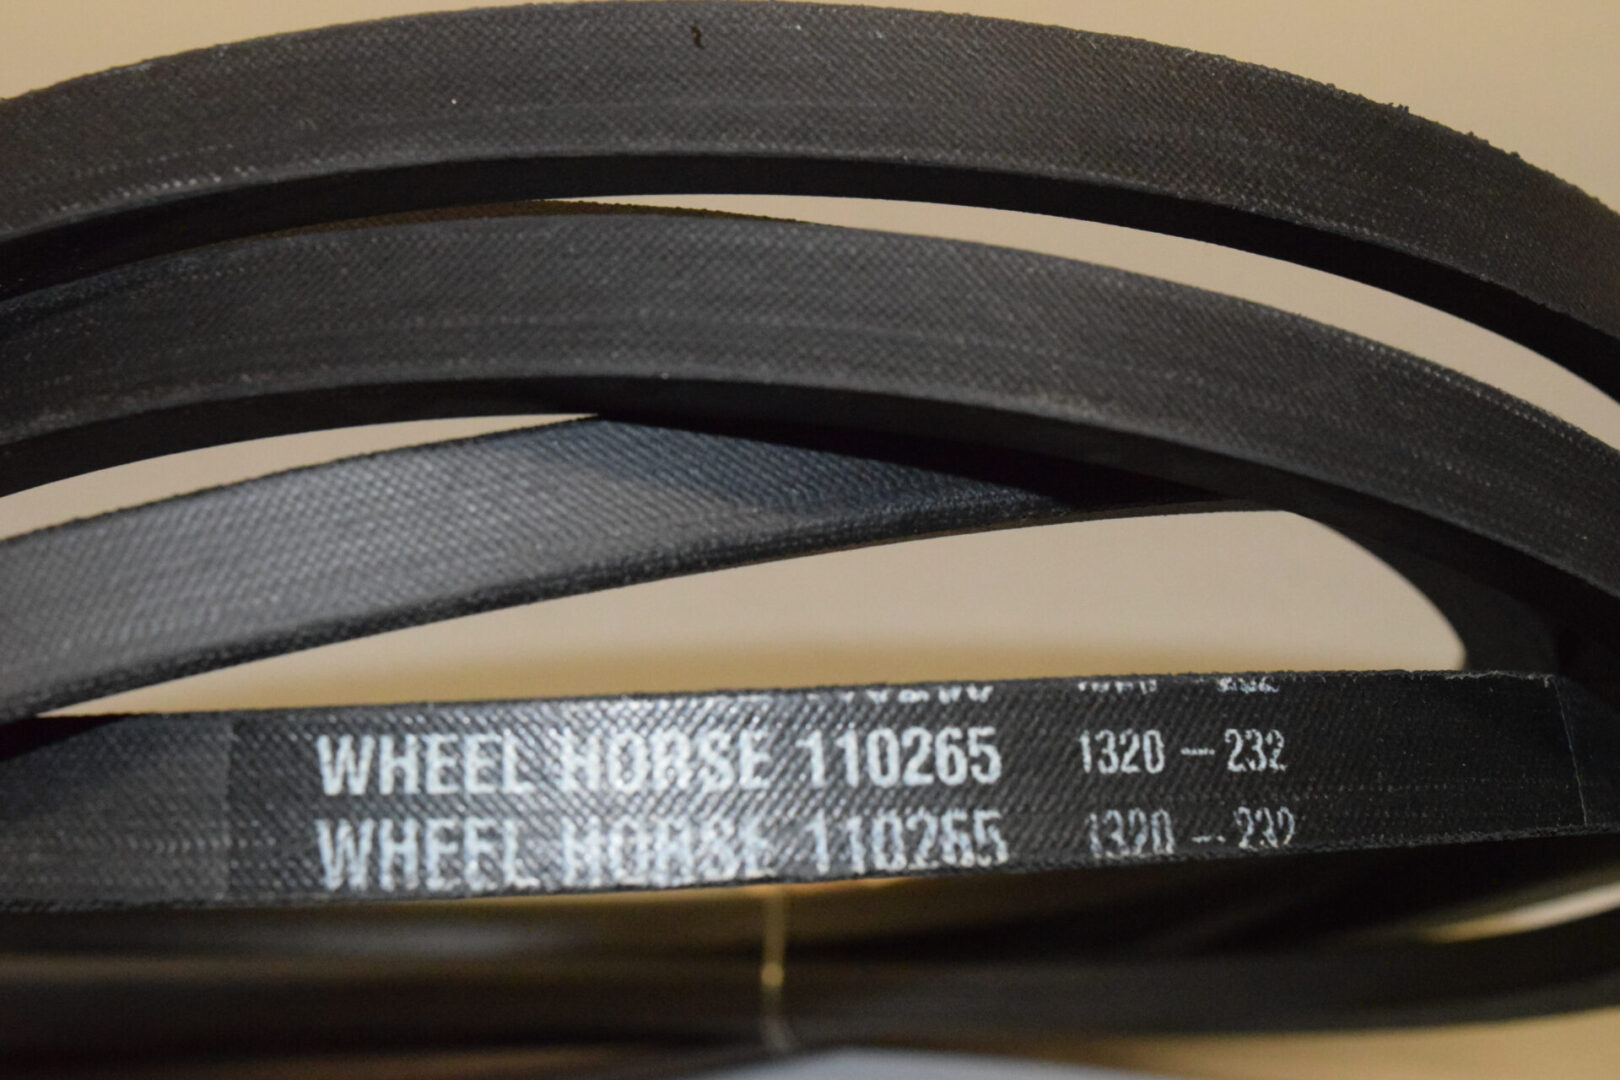 TORO or WHEEL HORSE 9714 made with Kevlar Replacement Belt 